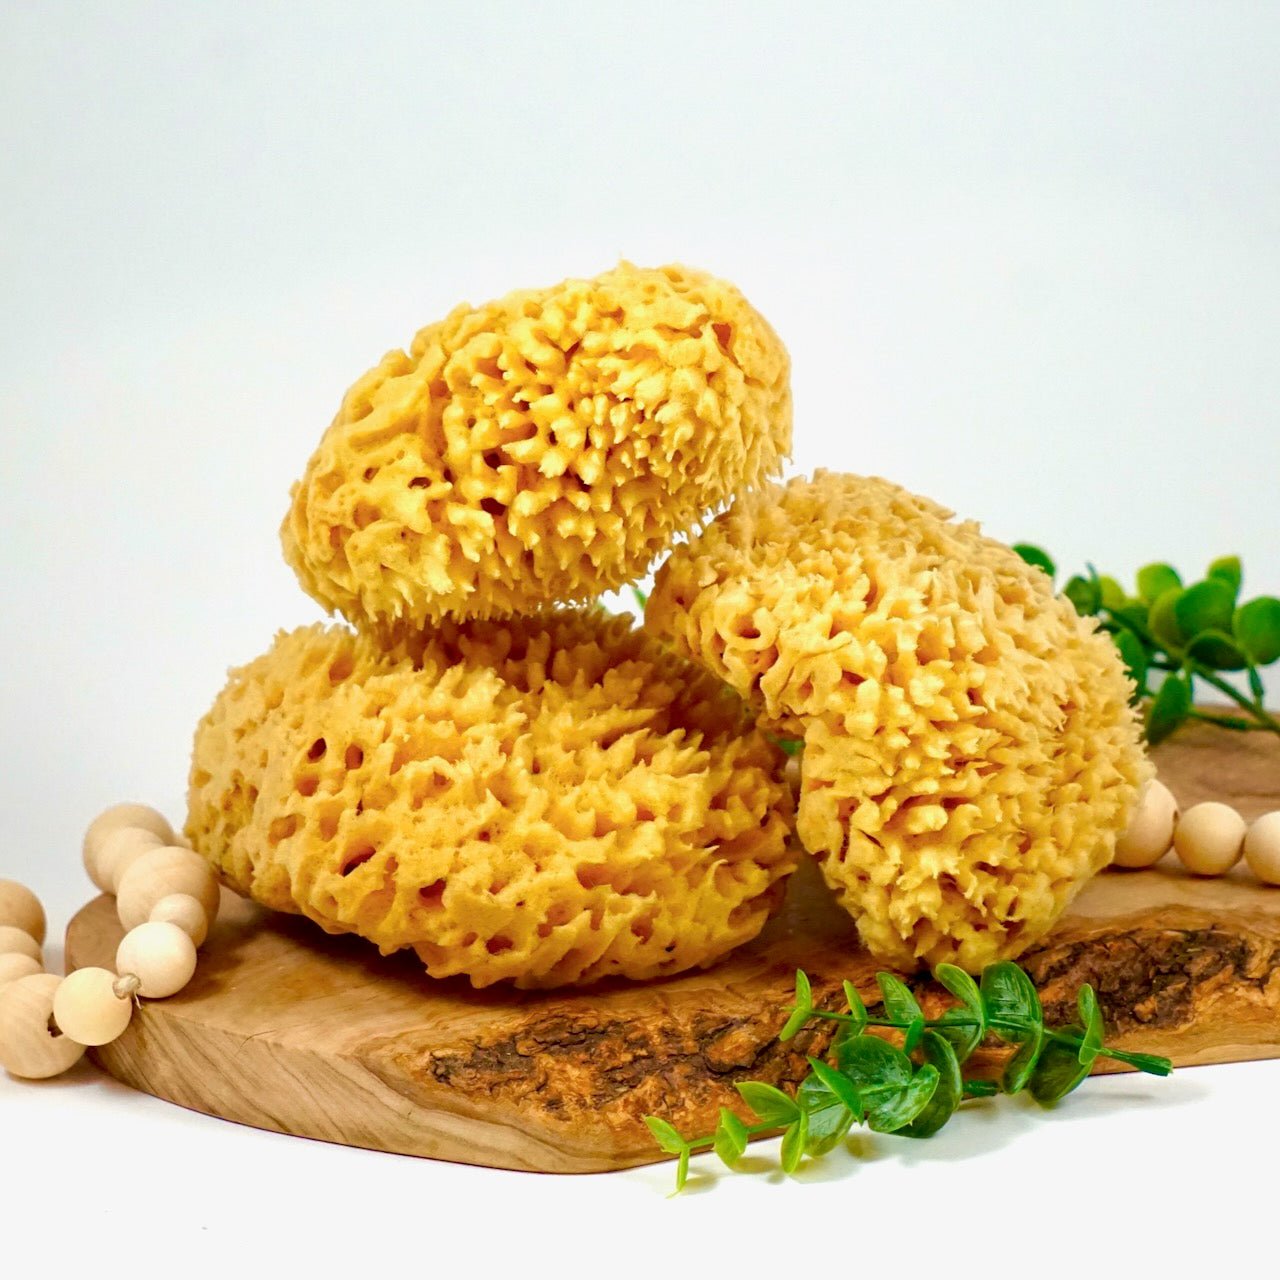 Sea Sponge, Sustainably Harvested - Simply Bliss